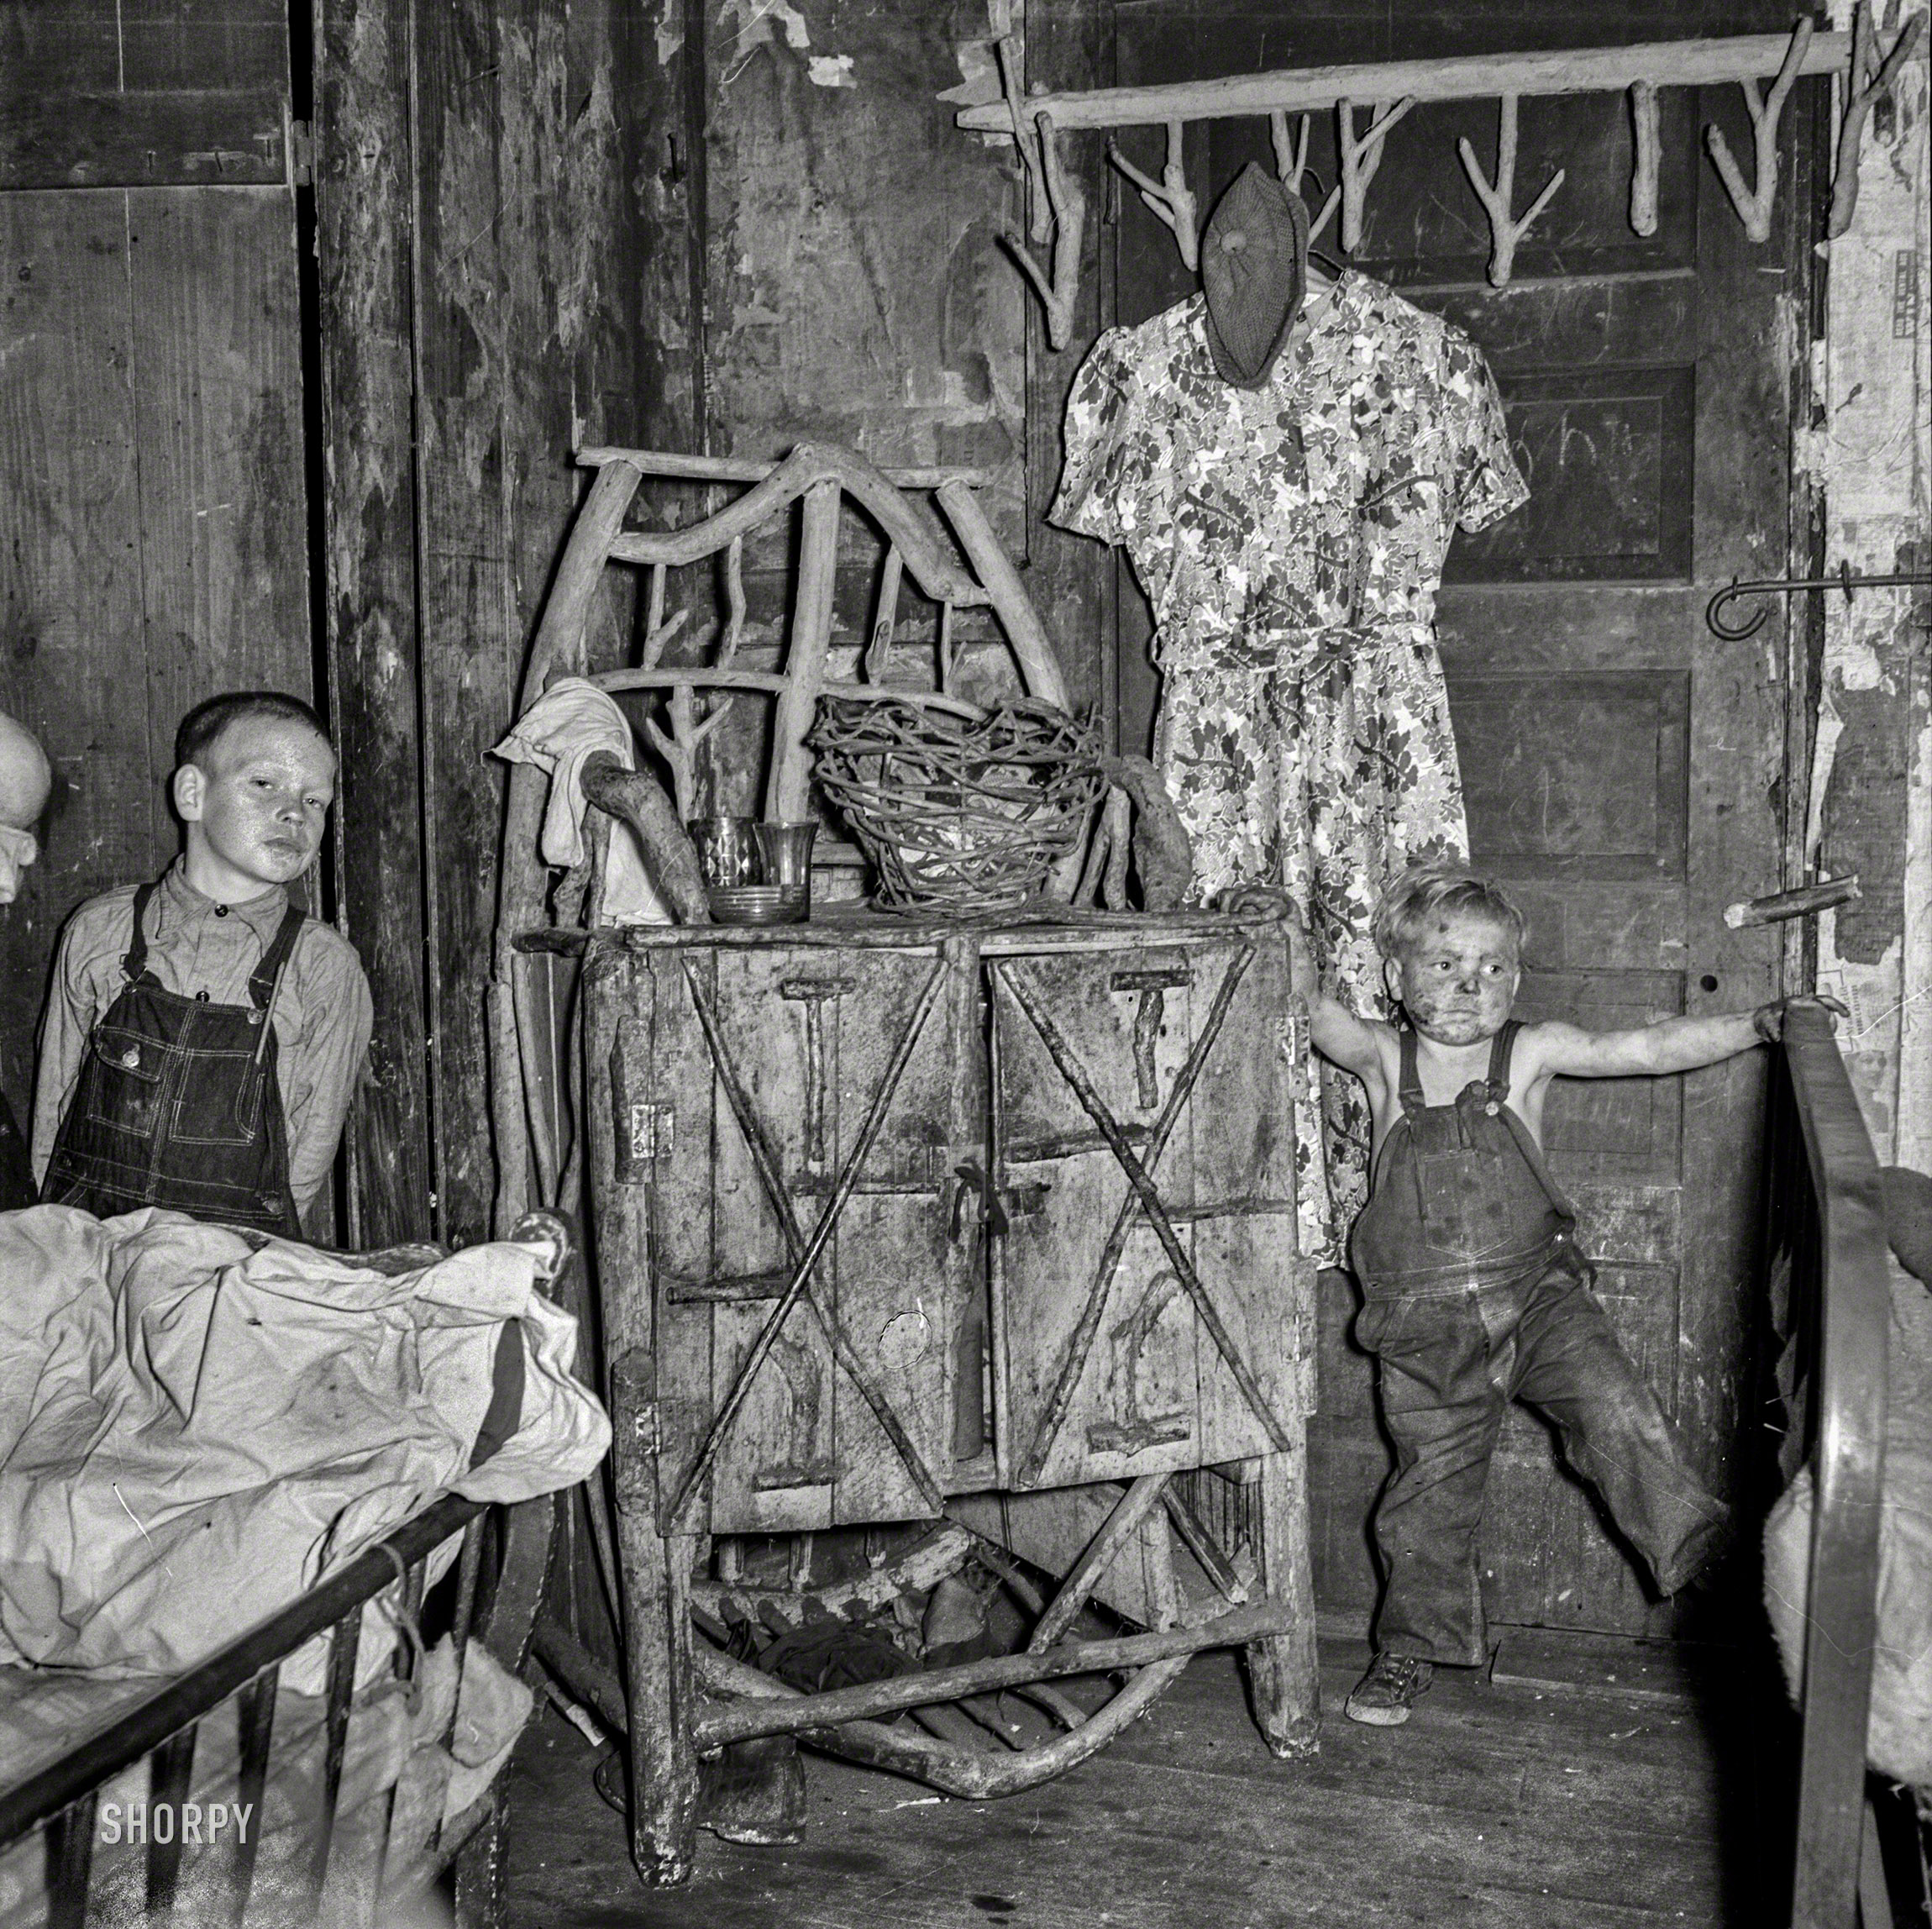 September 1938. "Homemade caned furniture in bedroom of coal miner's home. A company house. Pursglove, Scotts Run, West Virginia." Medium format negative by Marion Post Wolcott for the Resettlement Administration. View full size.